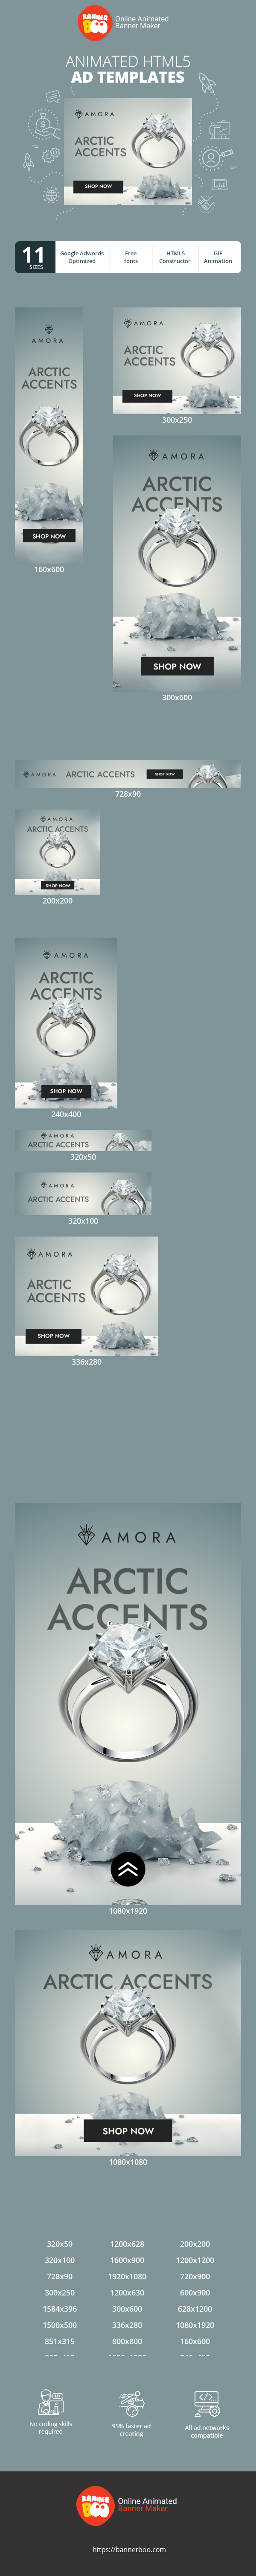 Banner ad template — Arctic Accents Effortless Charm — Jewelry